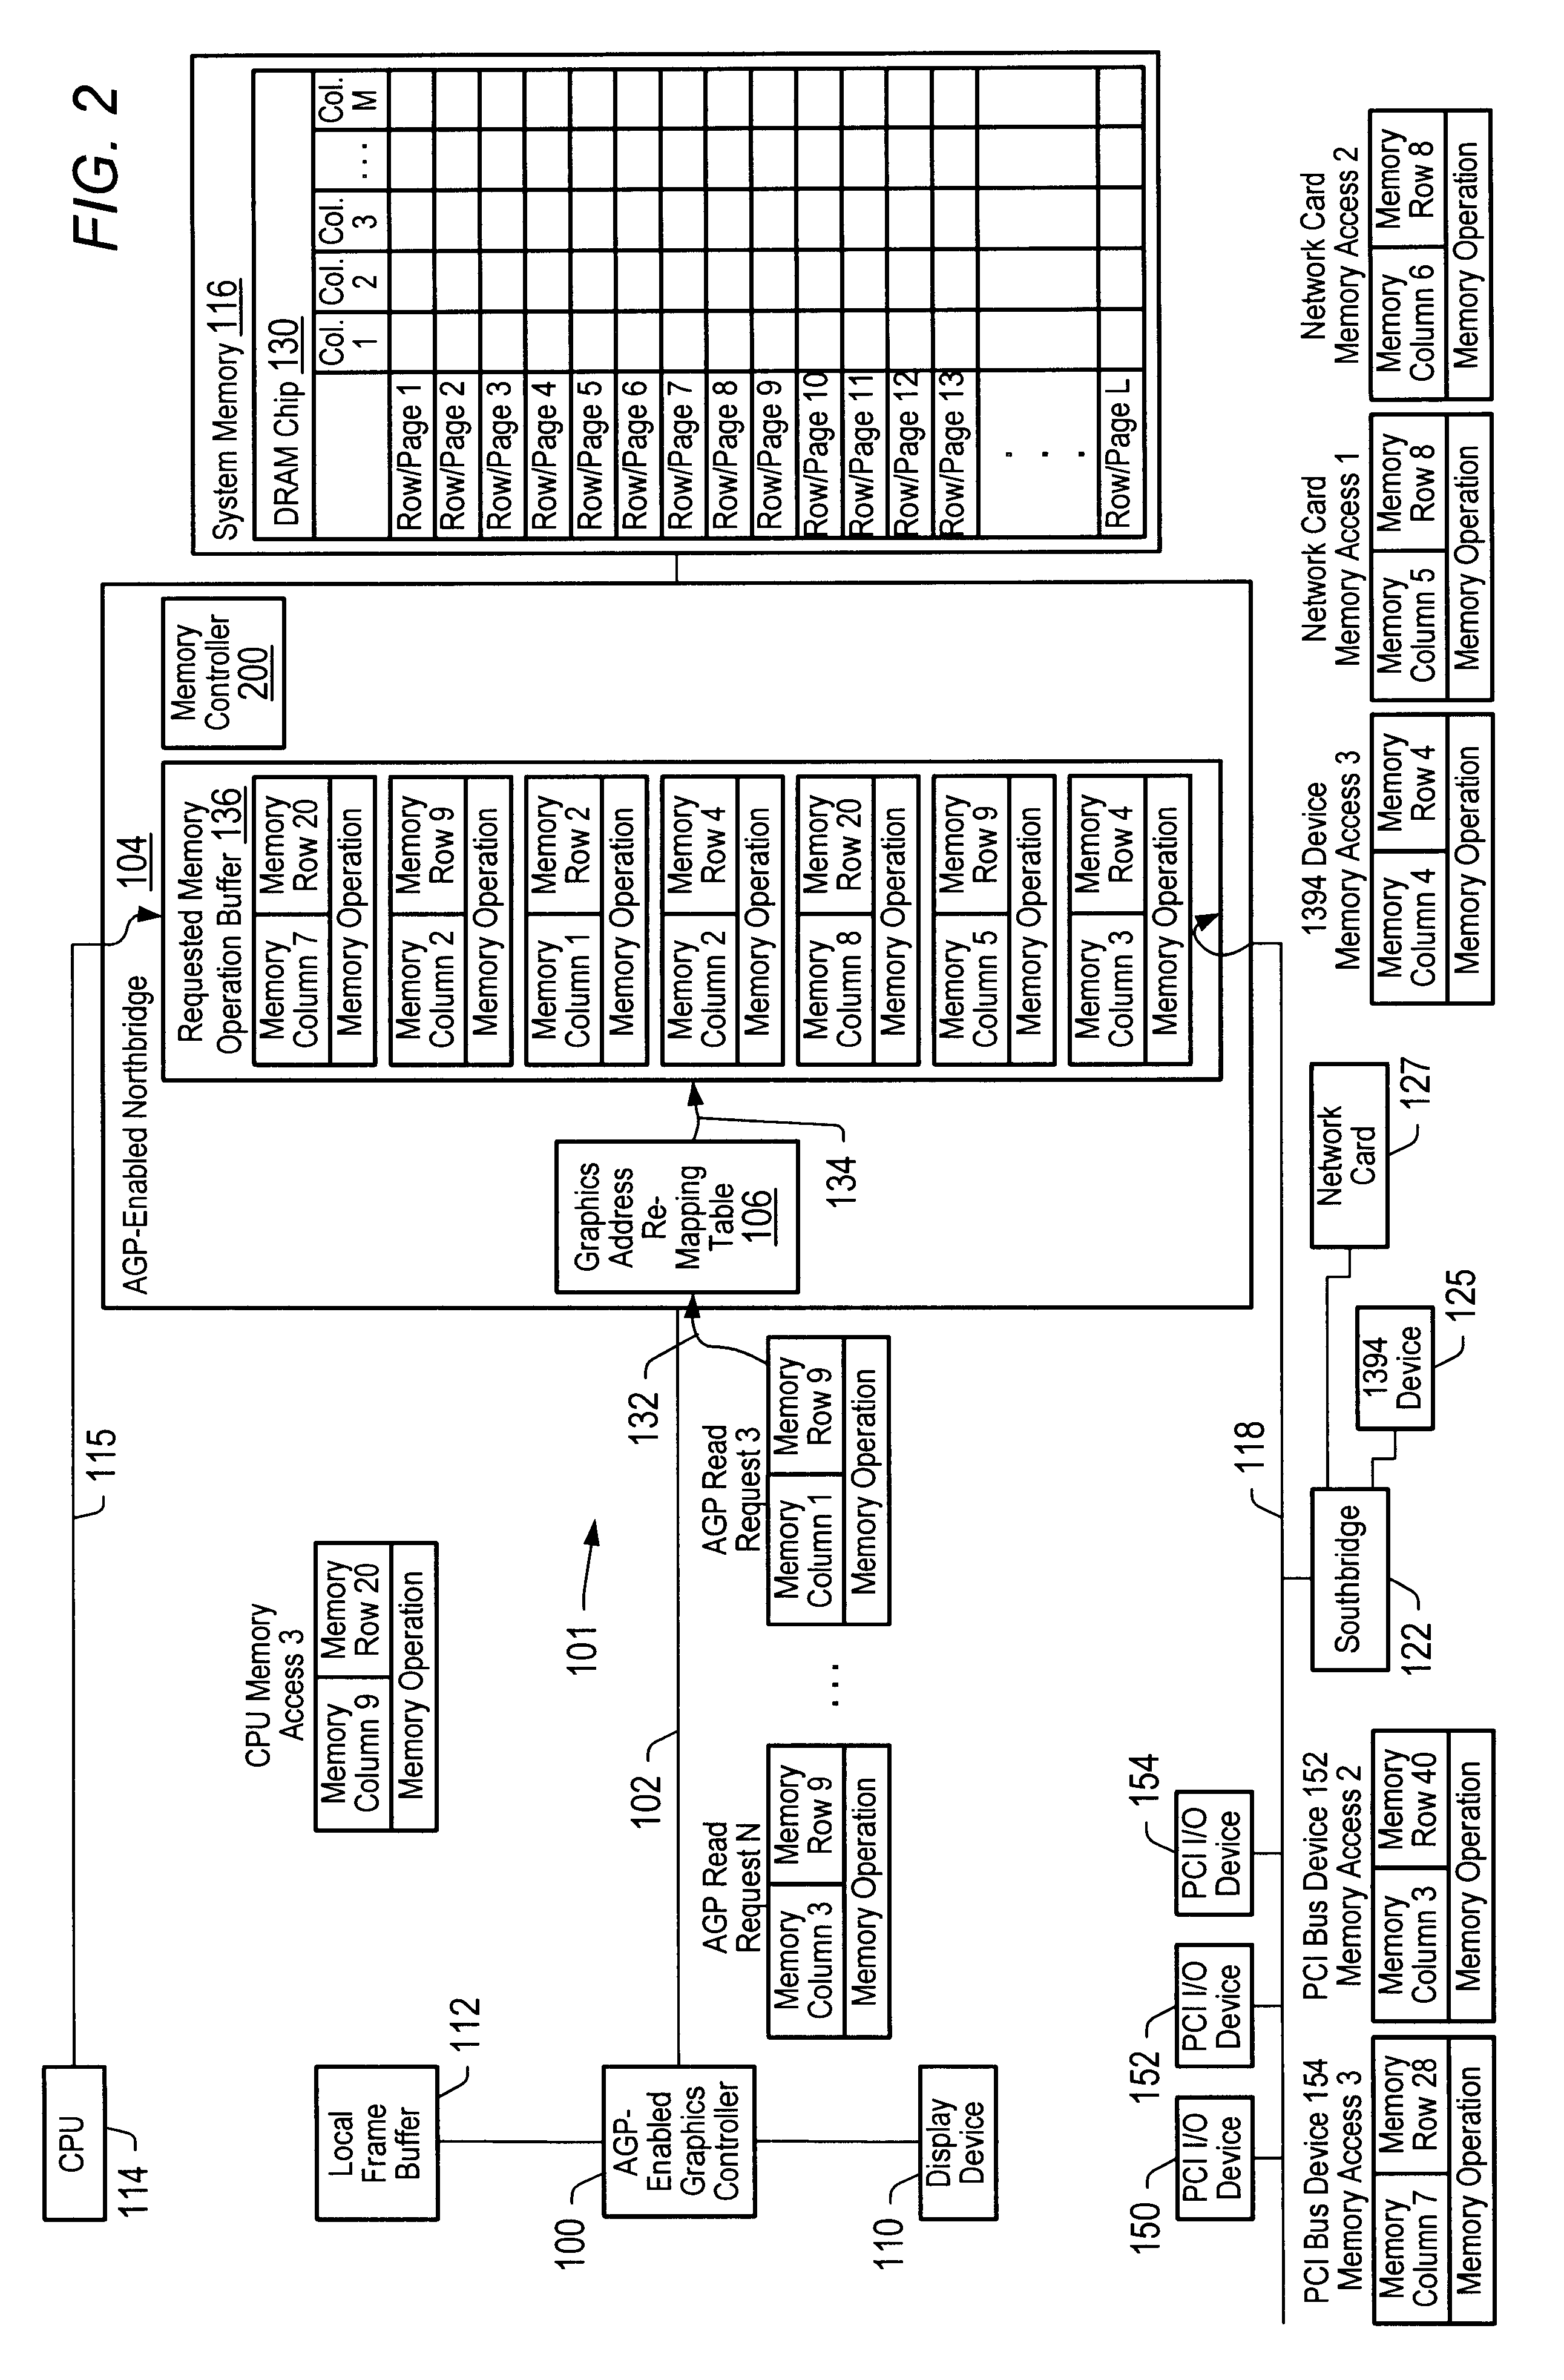 Method and system for improved data access